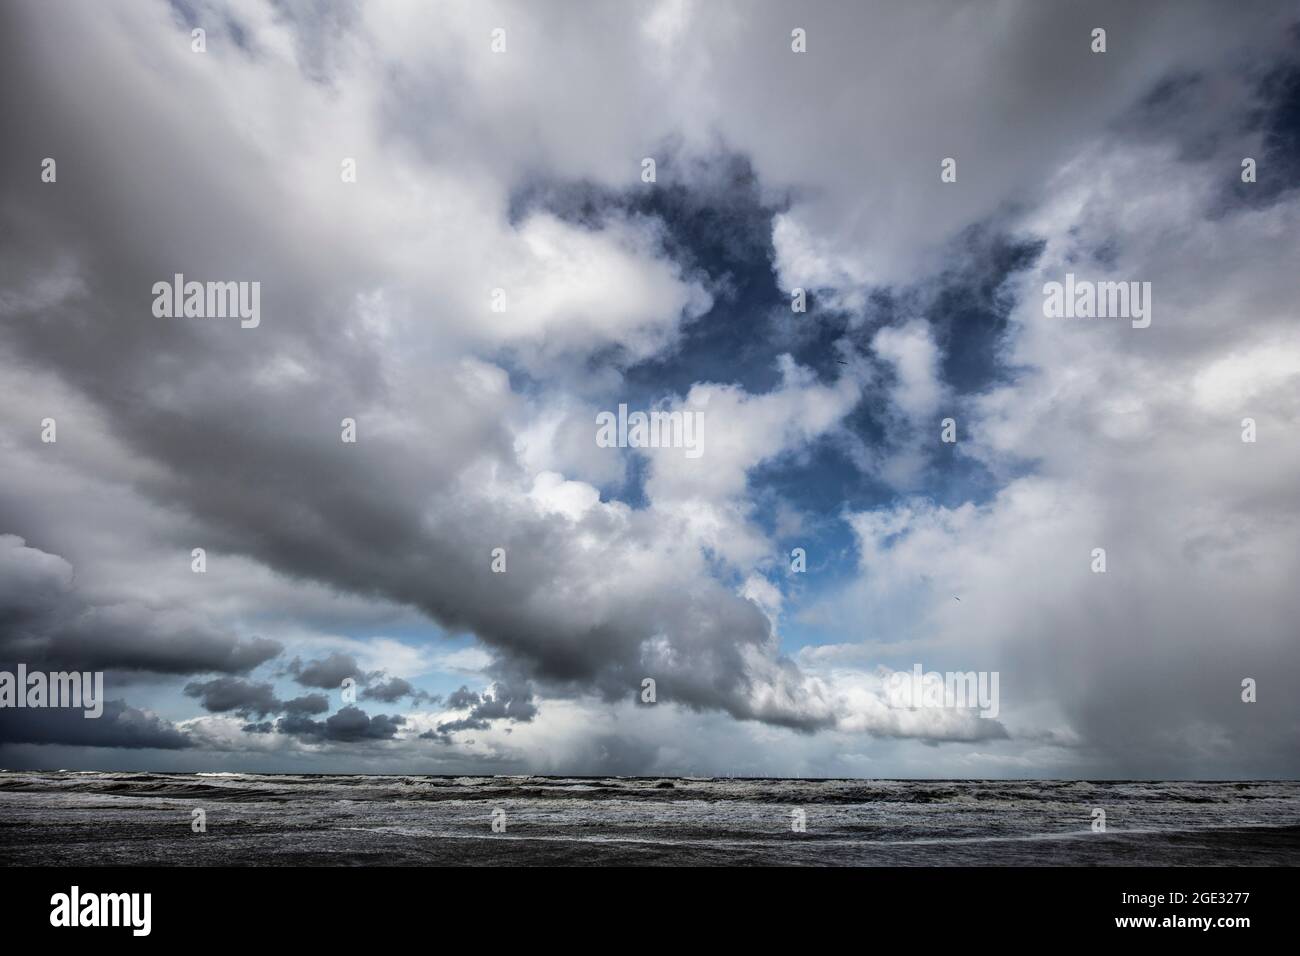 The Netherlands, Bergen, clouds. Stock Photo